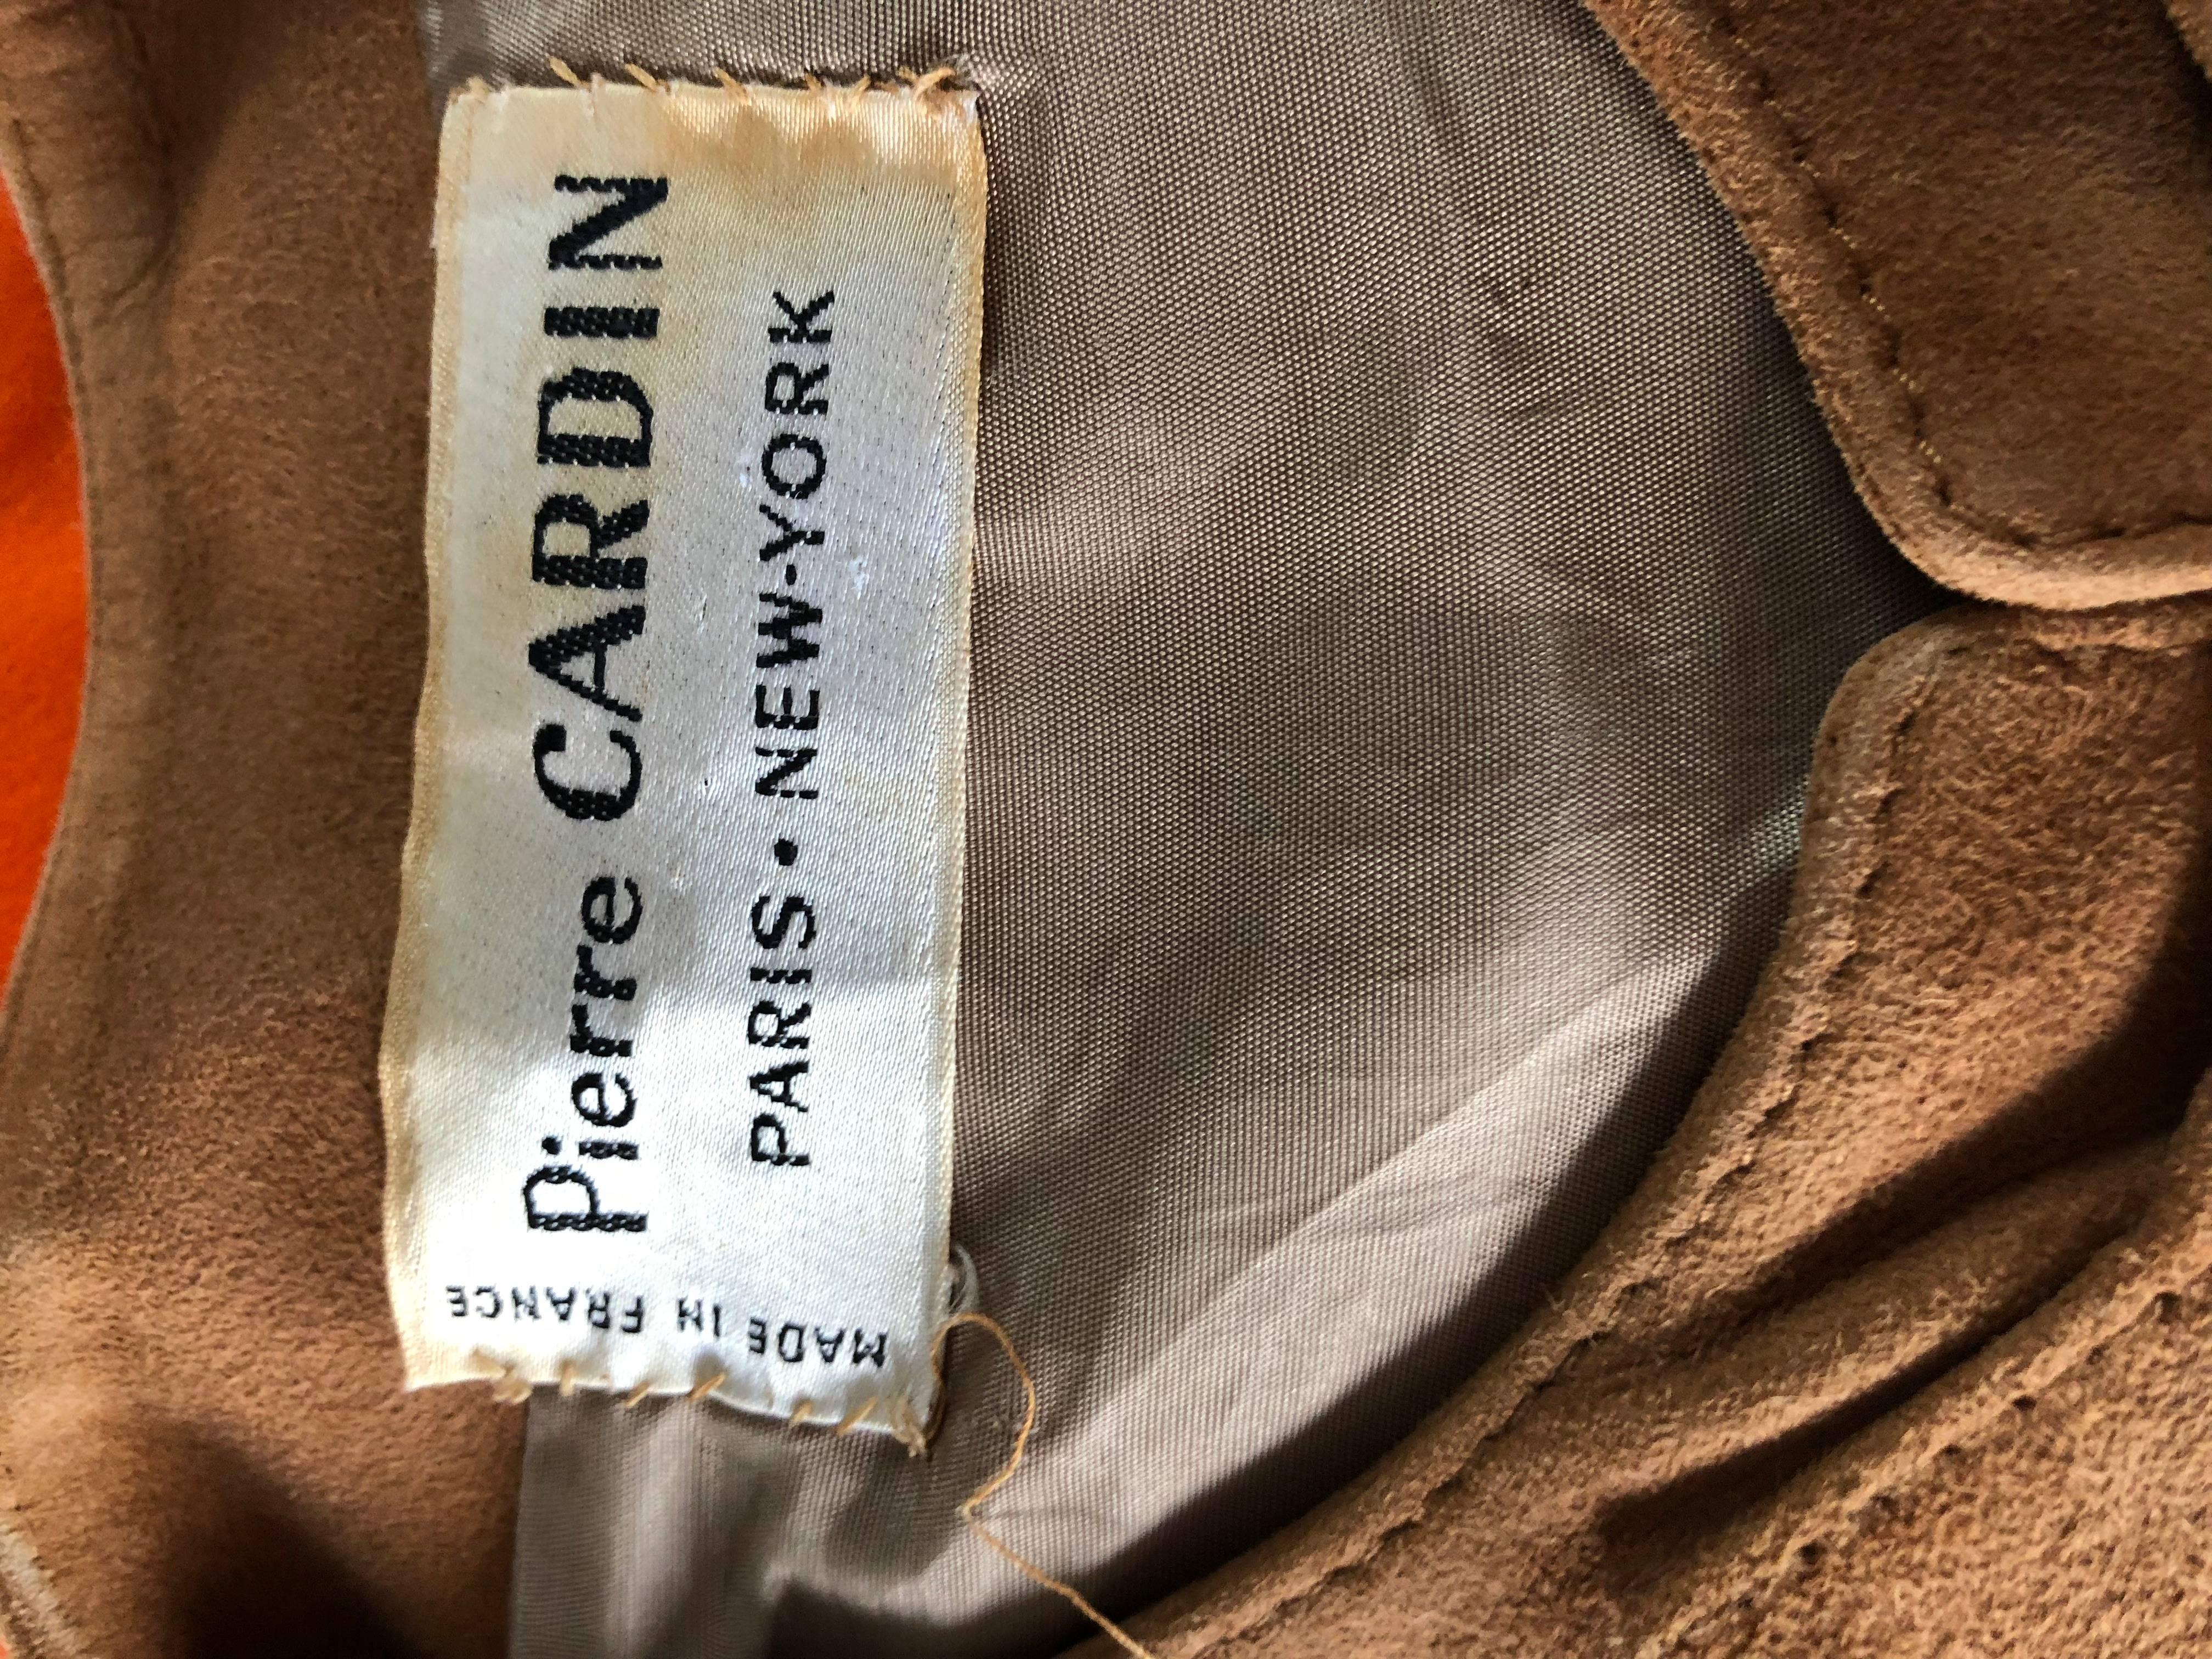 Iconic Avant Garde late 1960s PIERRE CARDIN suede leather vest top! Features gold plated buckles up the front. Soft suede leather in a beautiful tan color that literally matches everything. Fantastic tailored fit. Fully lined. 
Great alone with